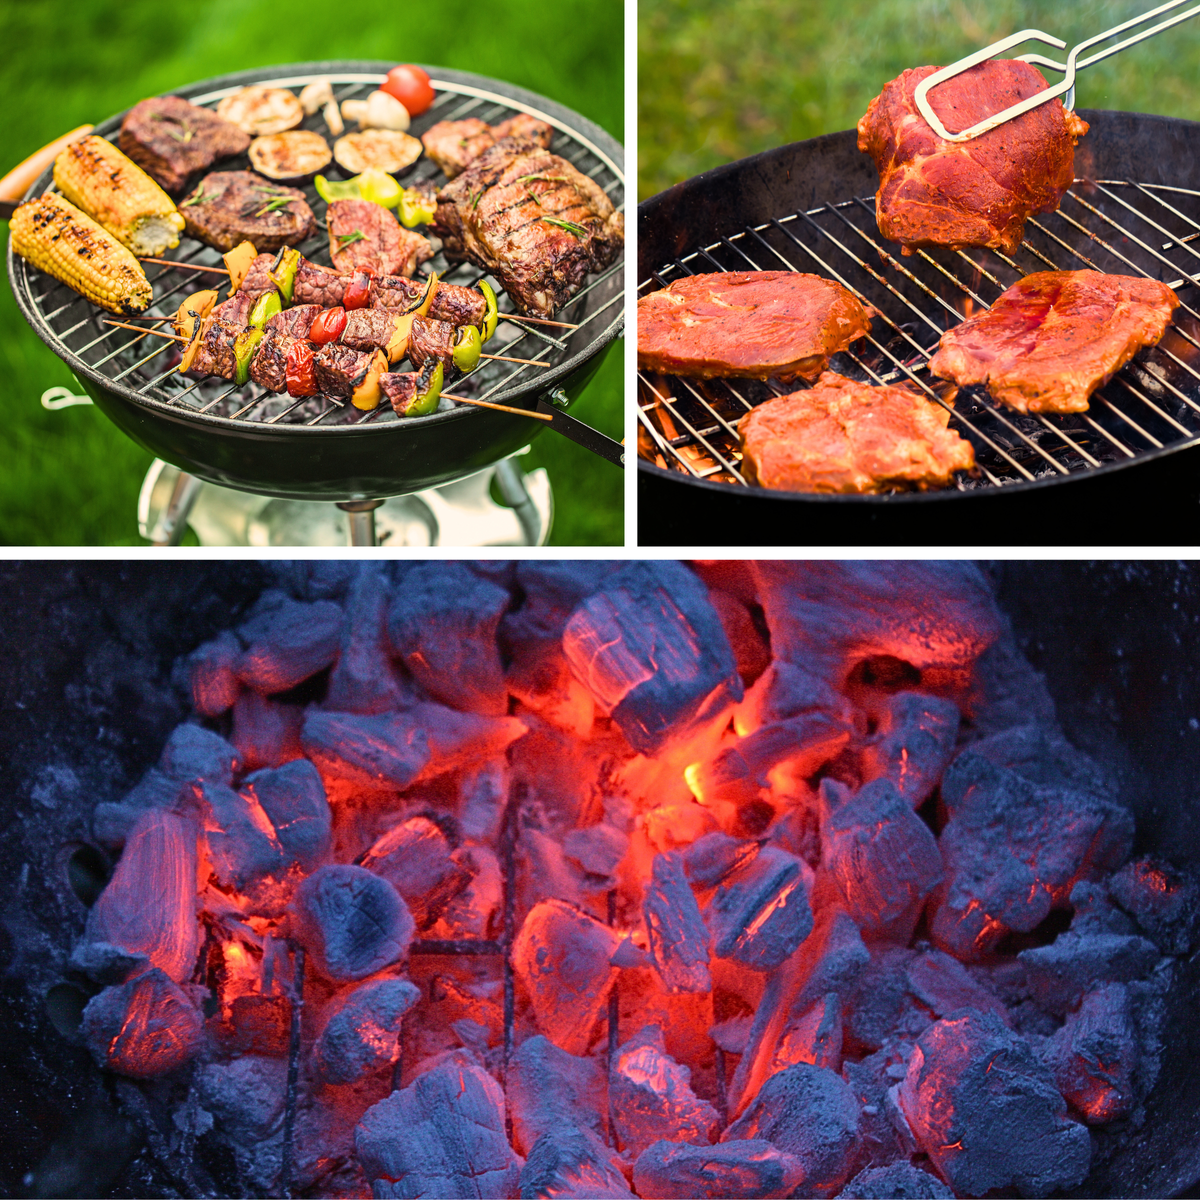 Grill with cooked meats and veggies, new steaks on grill, hot coals burning.